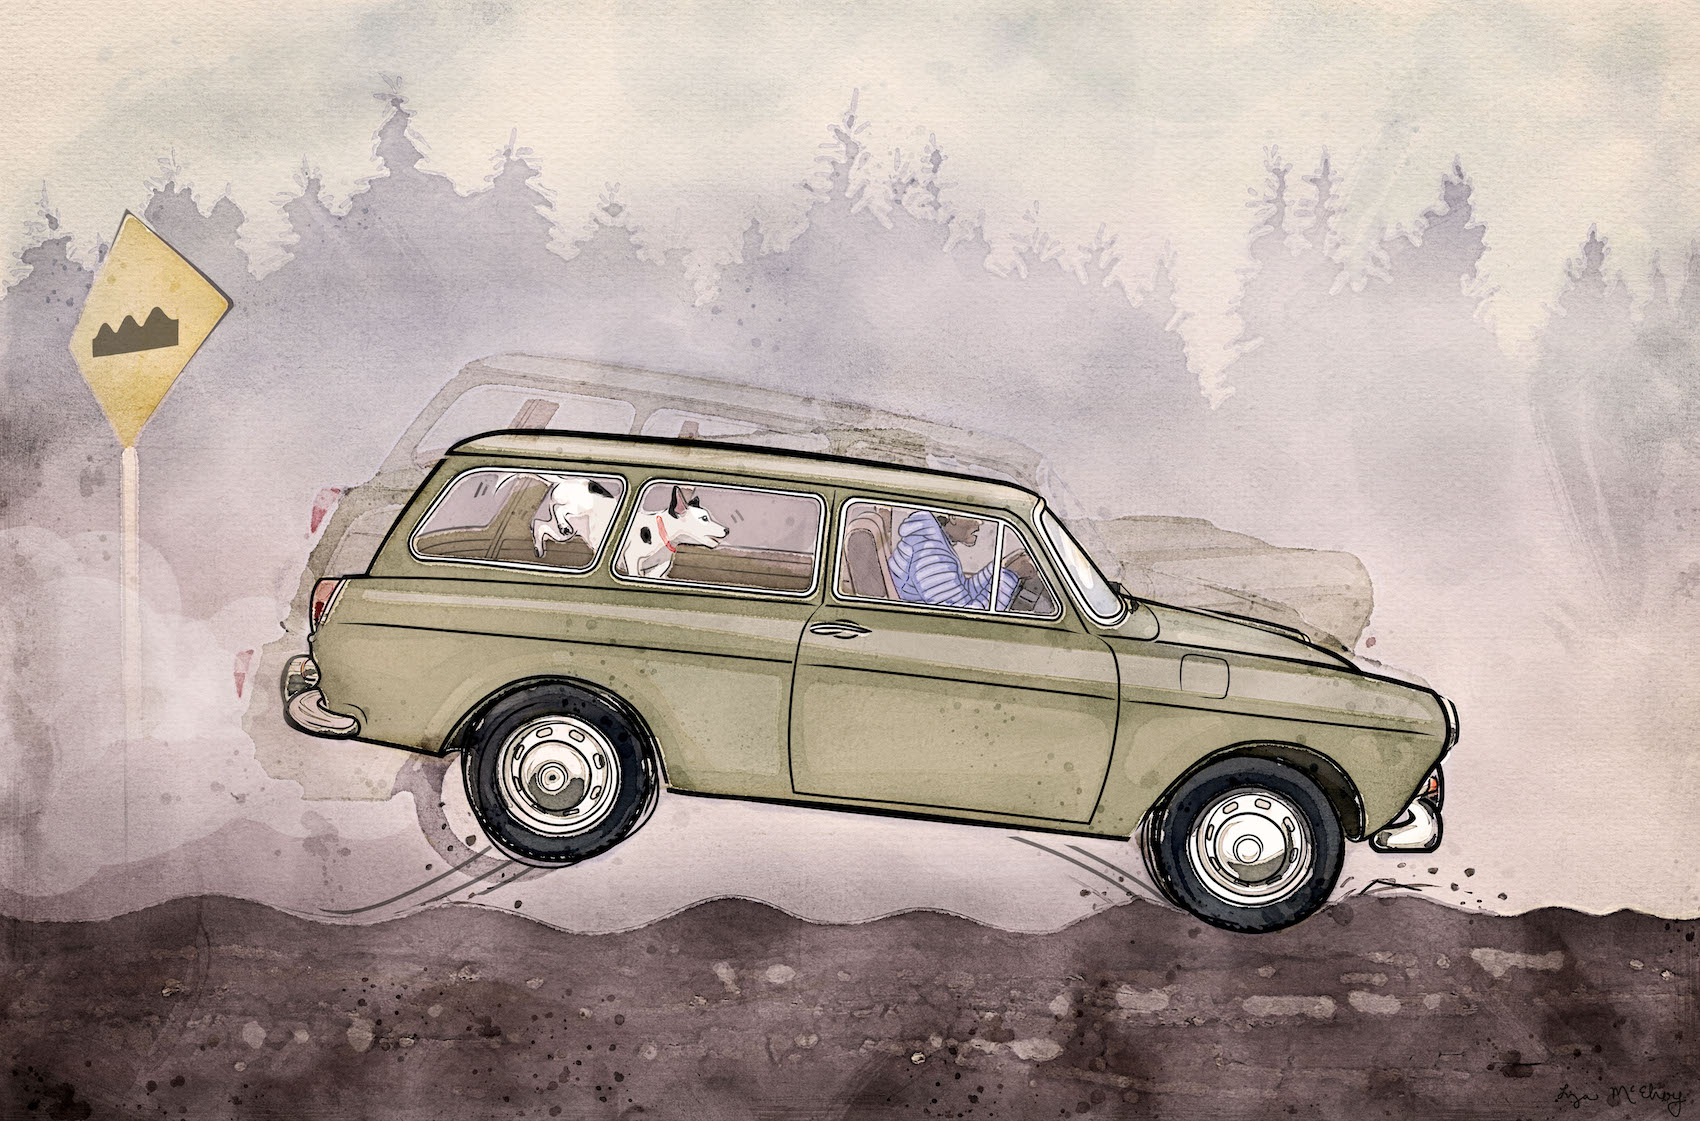 A painting illustrates a wagon-style vehicle bouncing along a bumpy road. A dog in the back of the vehicle is airborne.